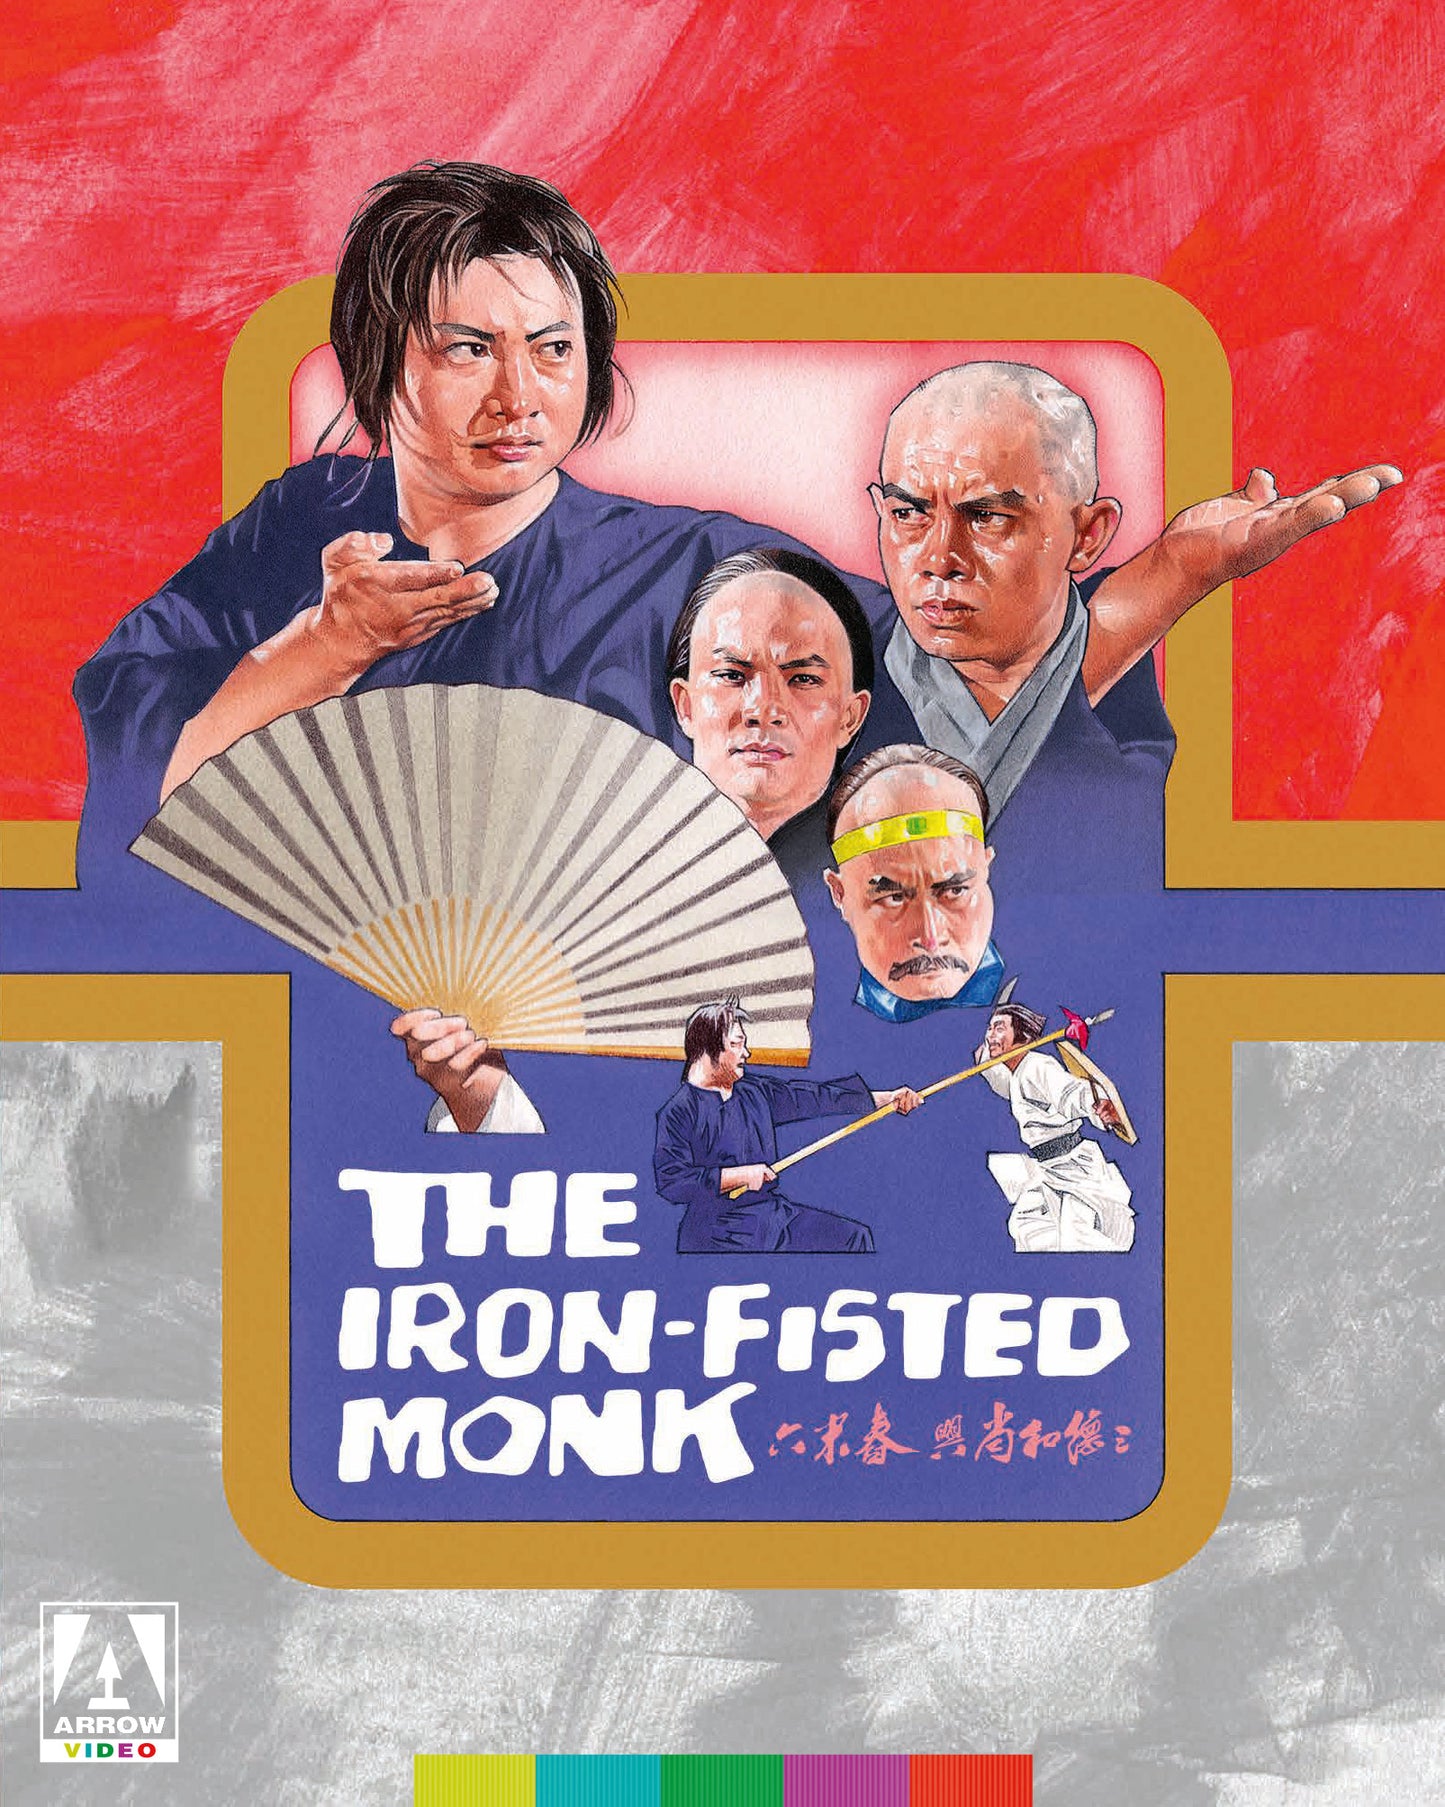 The Iron Fisted Monk Limited Edition Blu-ray with Slipcover (Arrow U.S.)